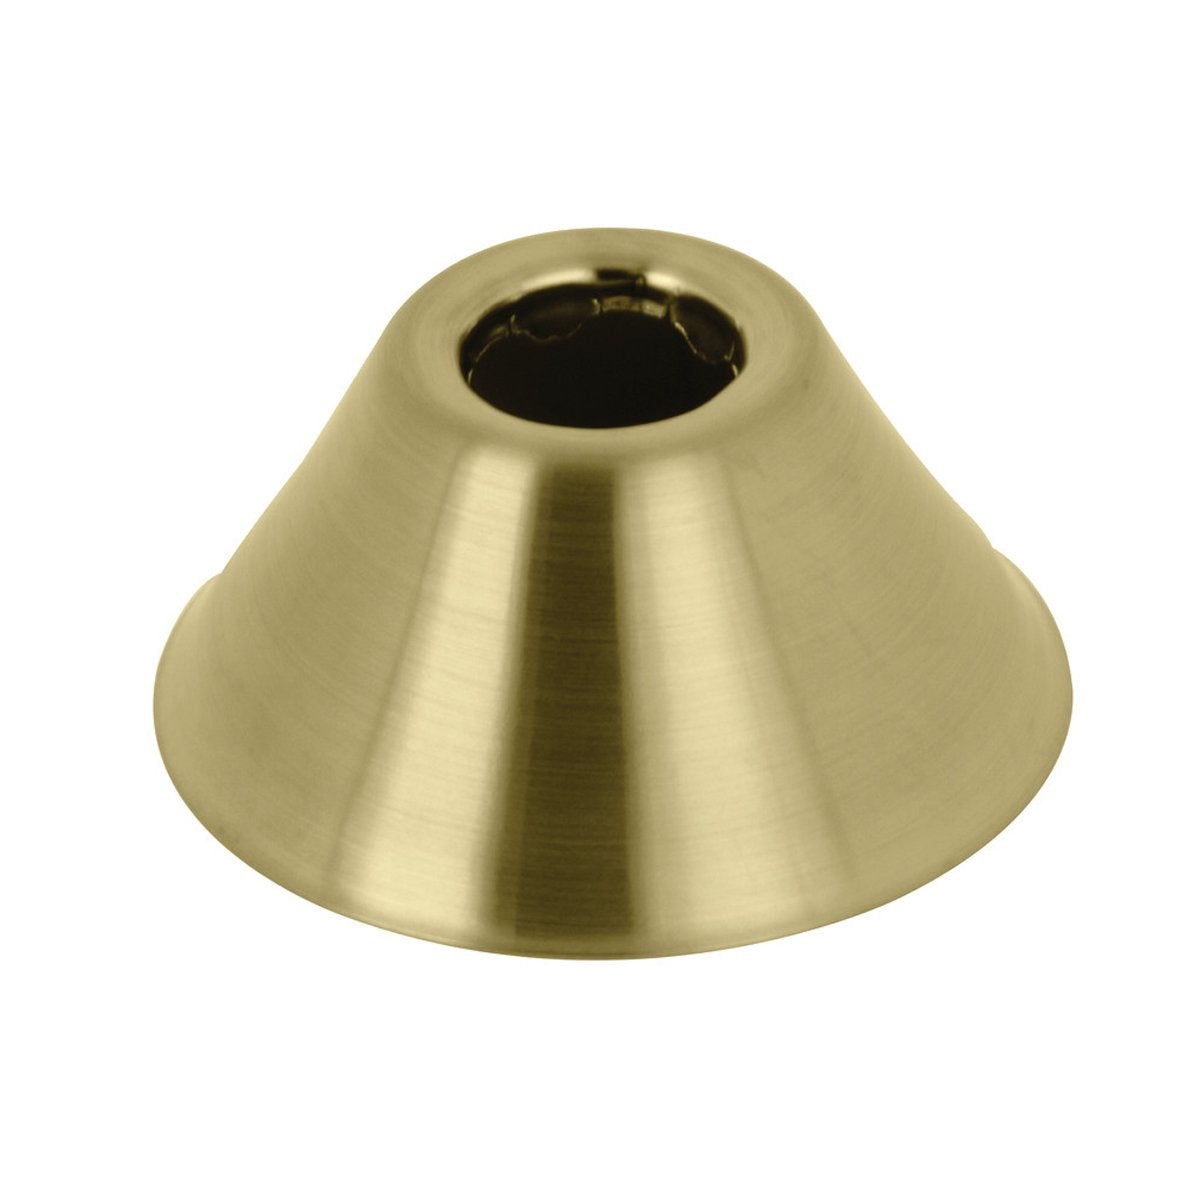 Kingston Brass Made To Match 11/16-Inch OD Comp Bell Flange